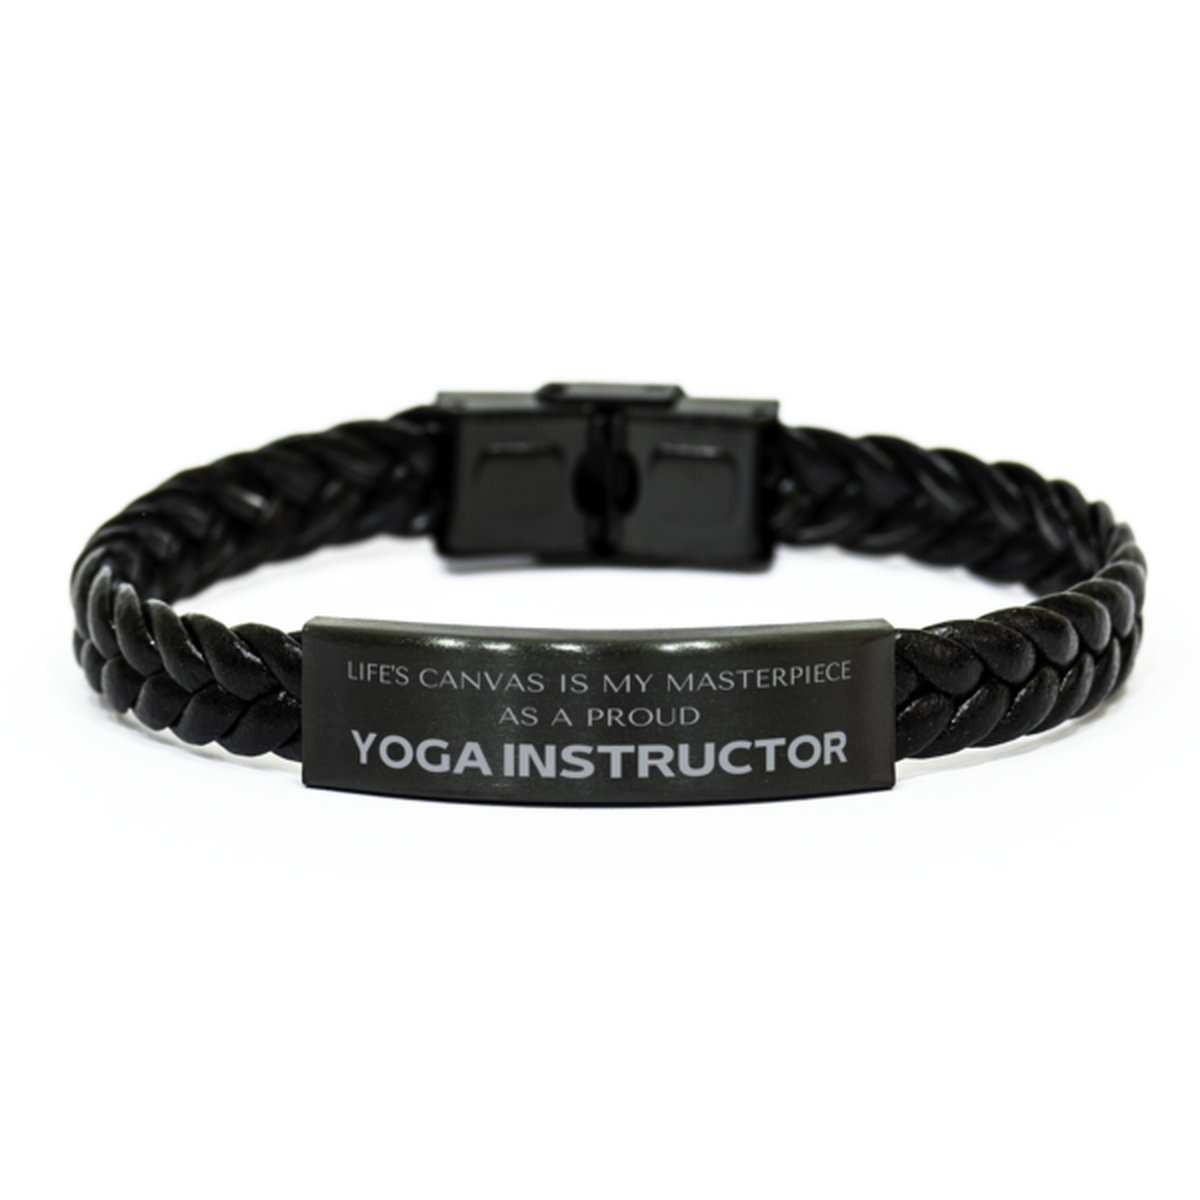 Proud Yoga Instructor Gifts, Life's canvas is my masterpiece, Epic Birthday Christmas Unique Braided Leather Bracelet For Yoga Instructor, Coworkers, Men, Women, Friends